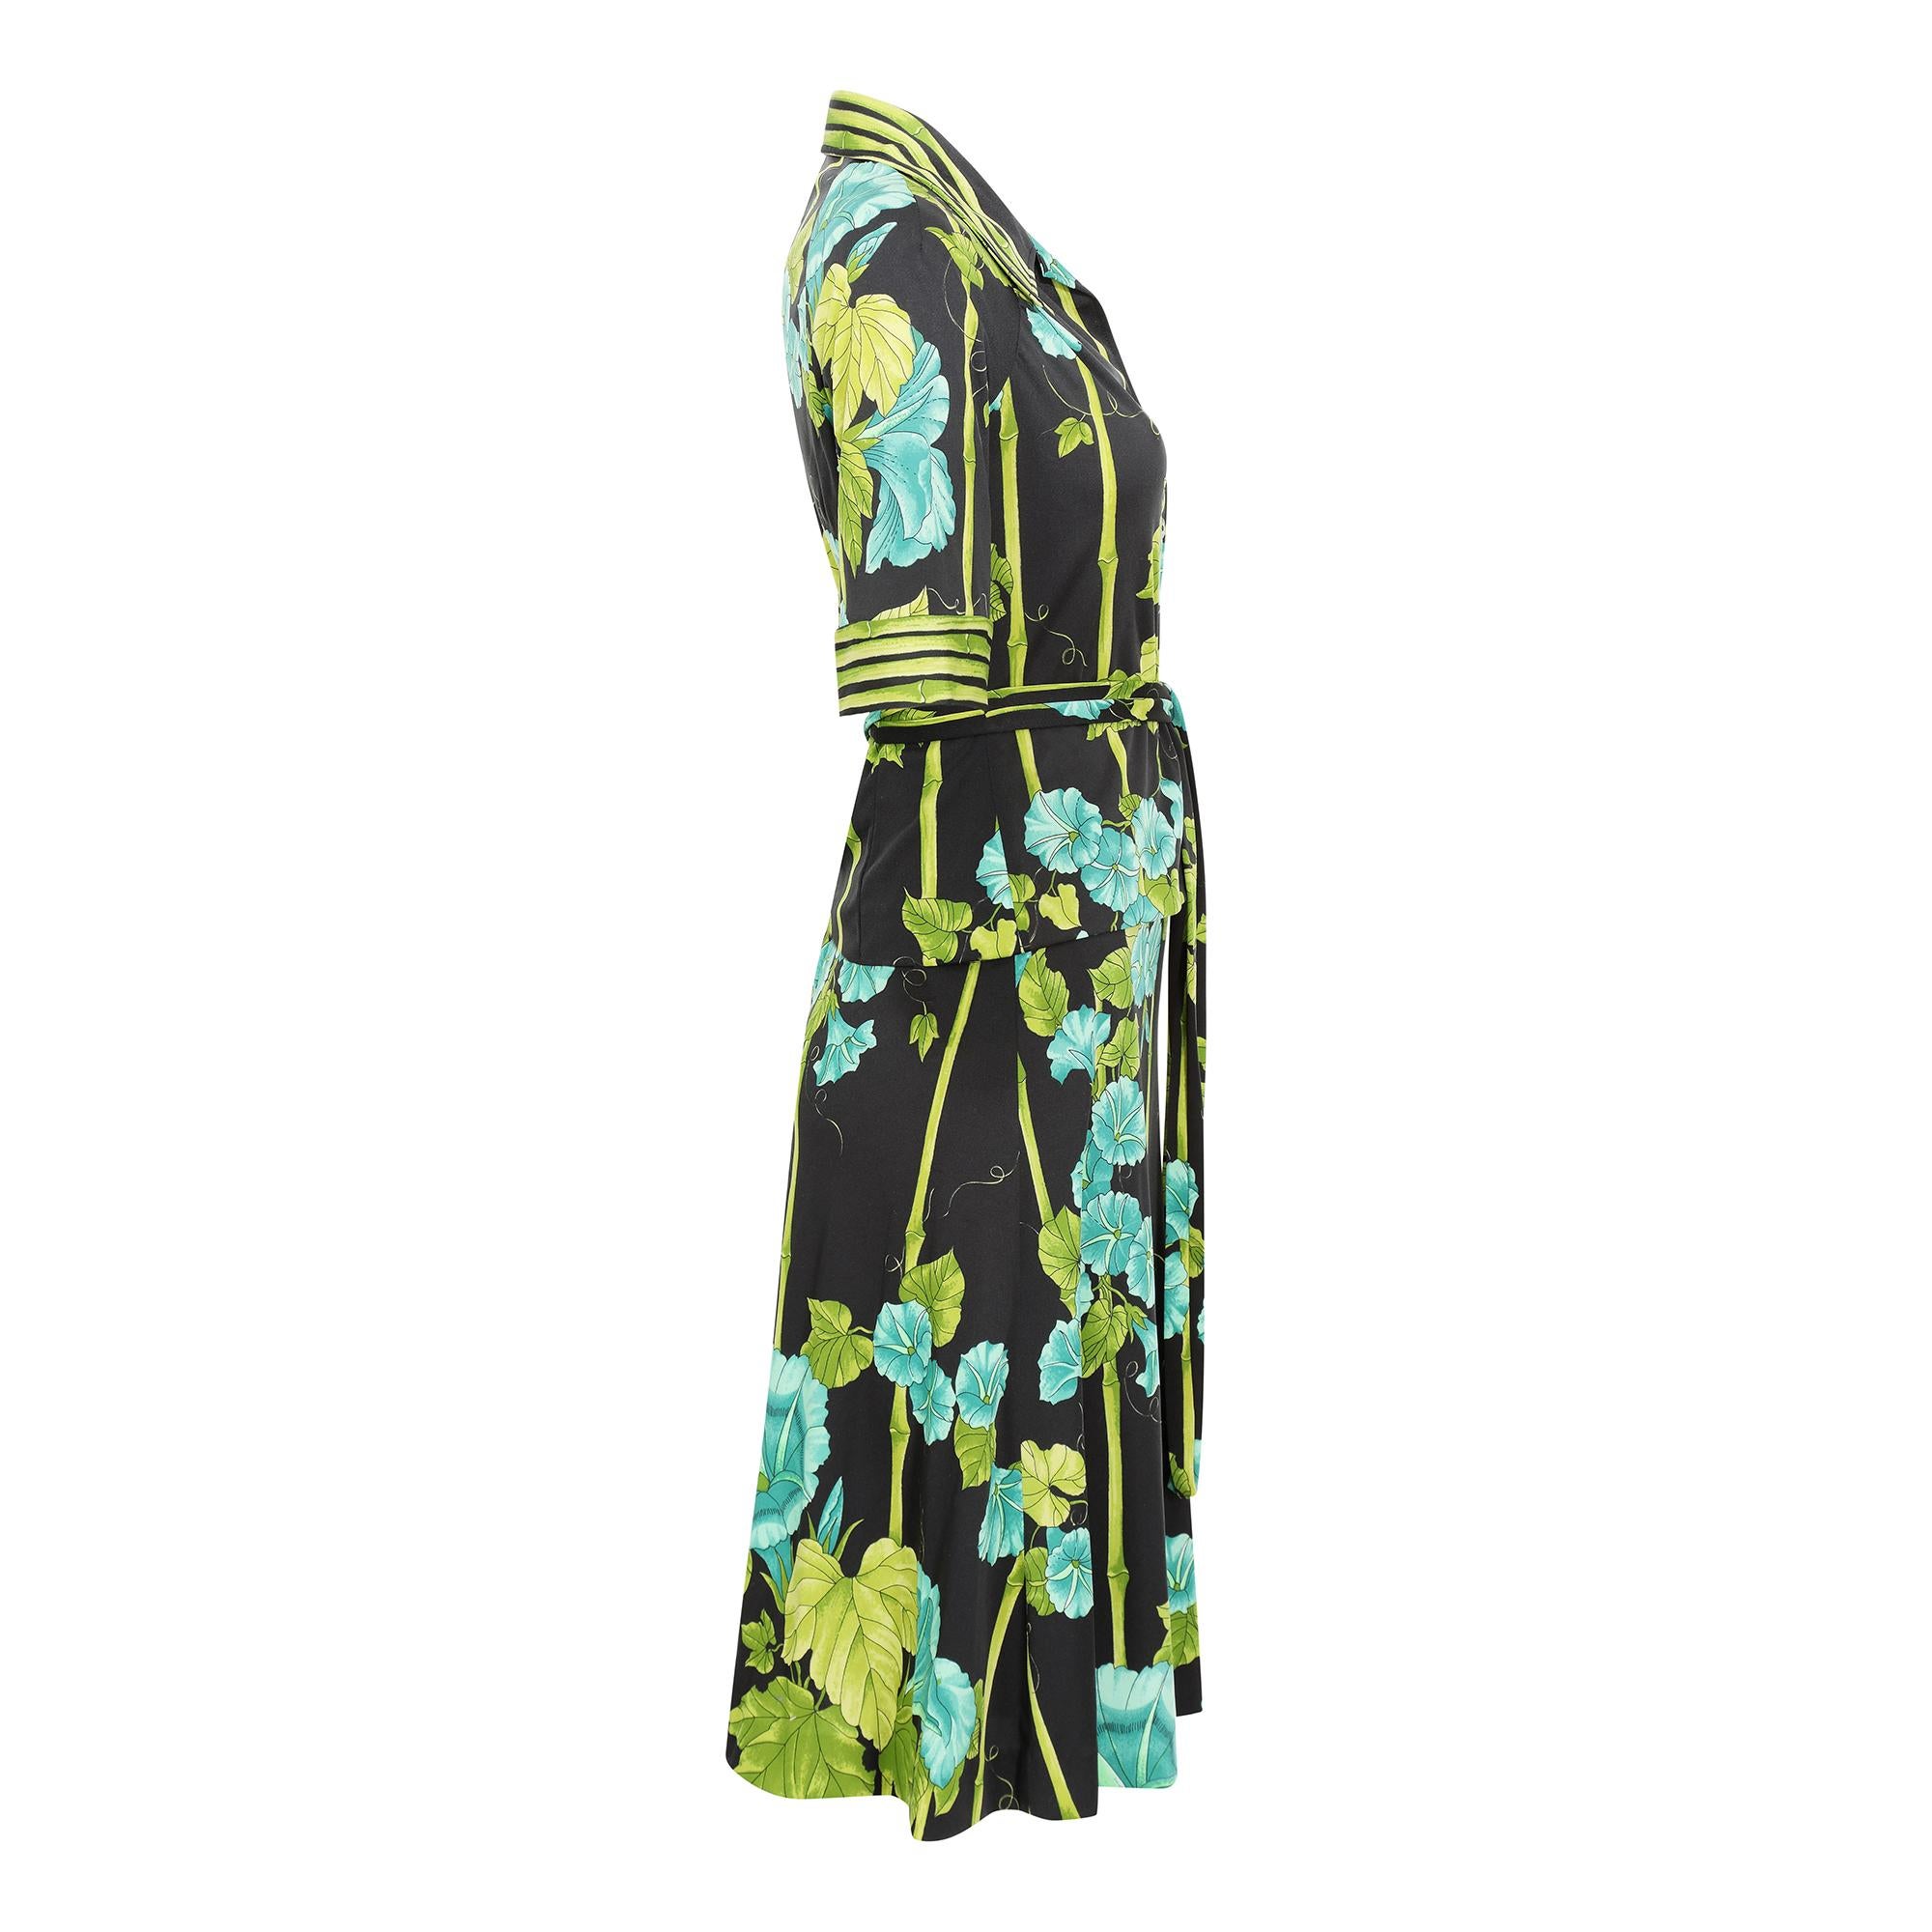 This is a very well made 1970s polyester jersey skirt set by British design house Frank Usher.  The attractive print is composed of heavenly trumpet flowers, vine leaves and what appear to be bamboo stems. We particularly like the way that the